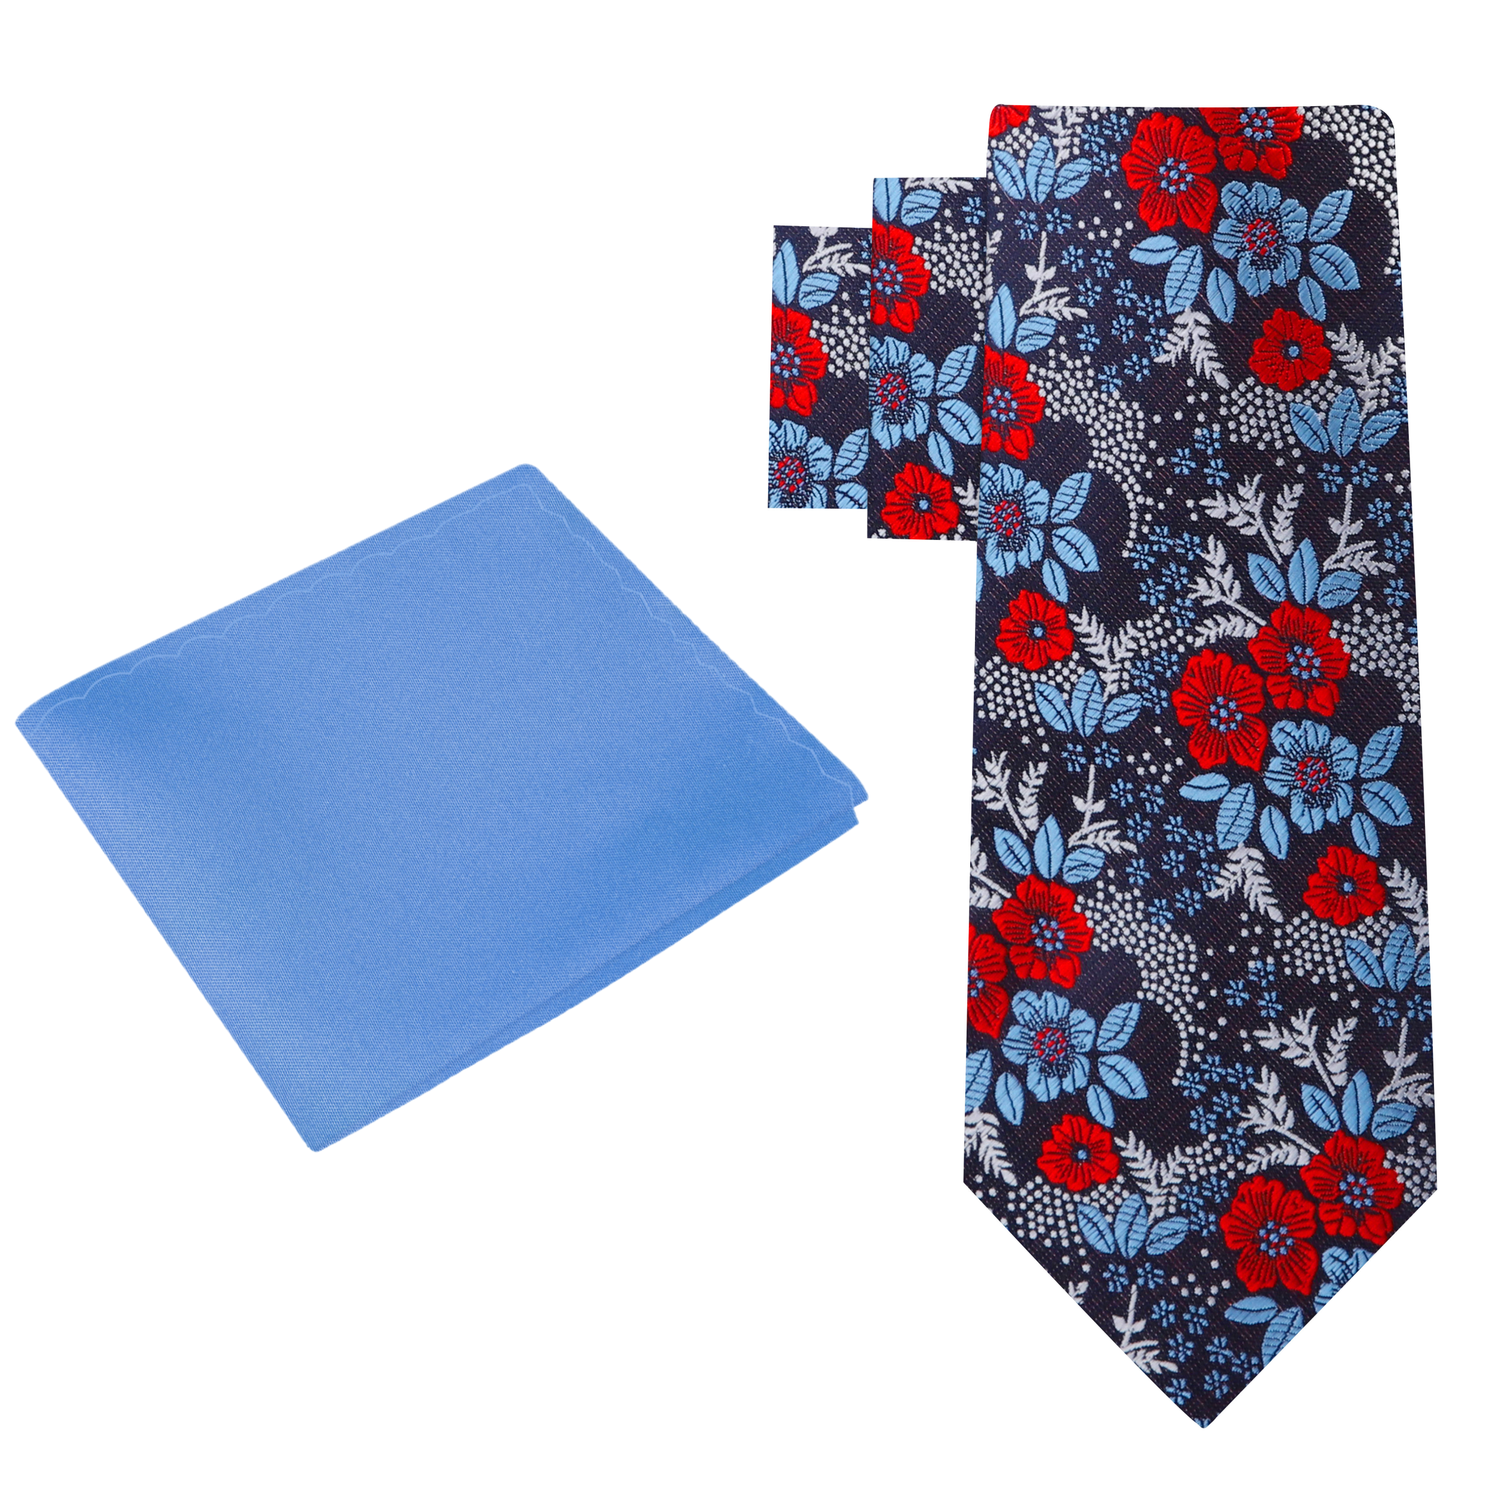 Alt View: Blue, Red, Silver Floral Necktie with Accenting Blue Square